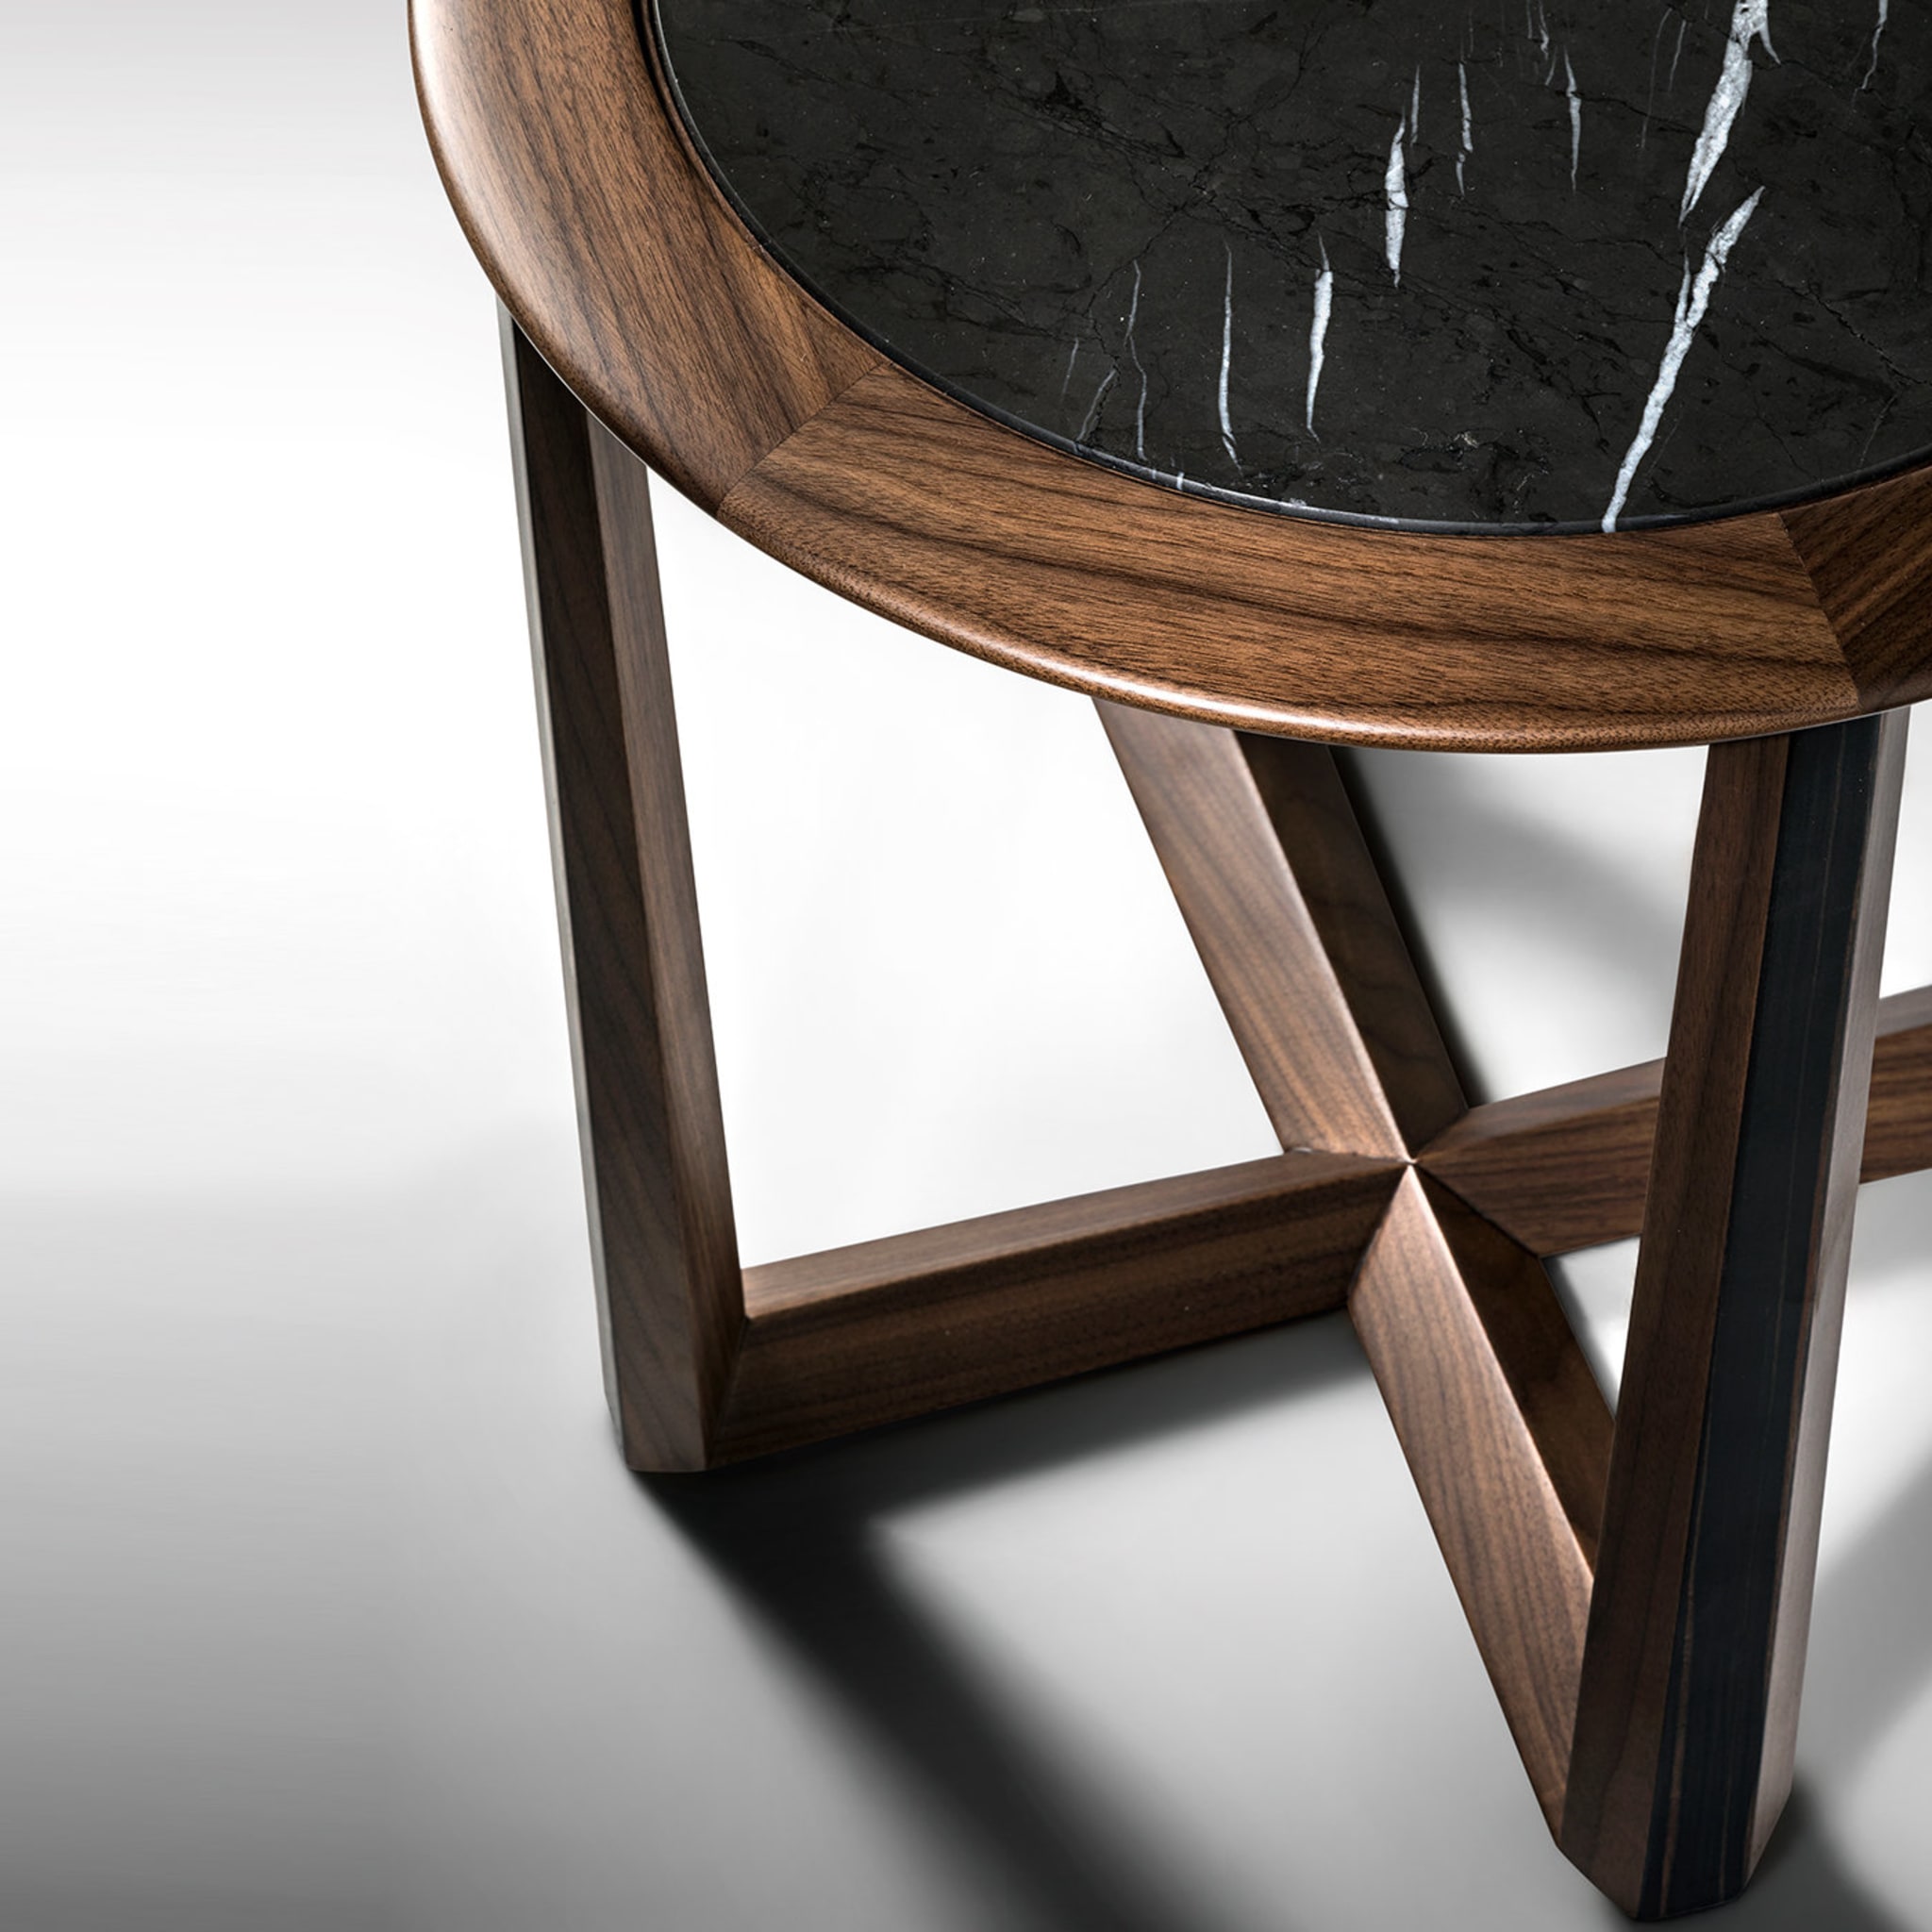 Triangolo Side Table by Ivano Colombo - Alternative view 1